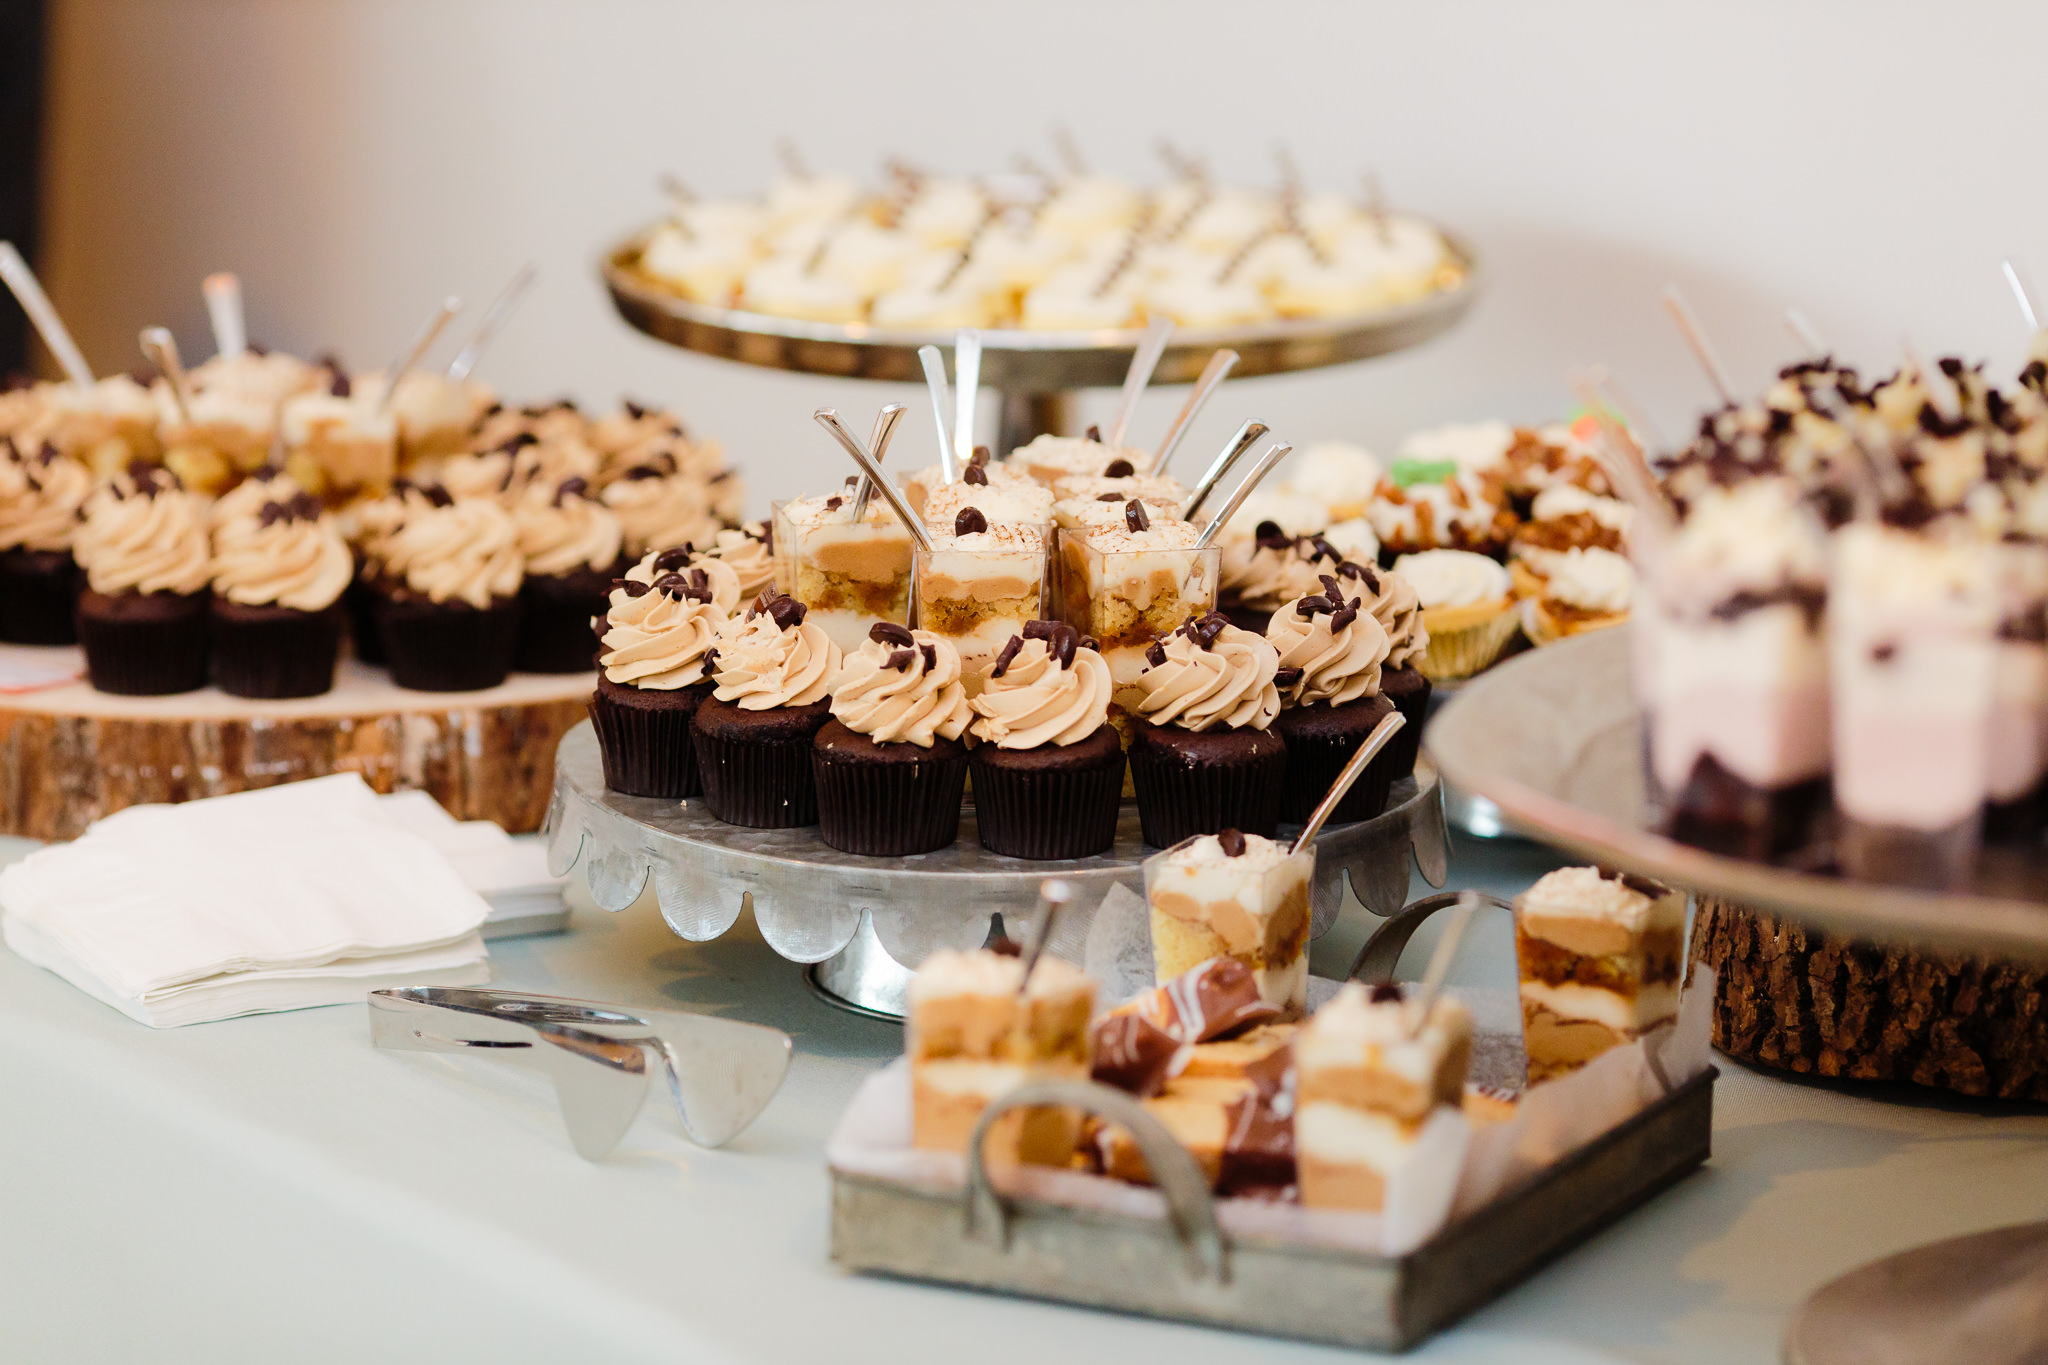 Dessert spread by Bella Christie & Lil Z's Sweet Boutique at a Phipps Conservatory wedding